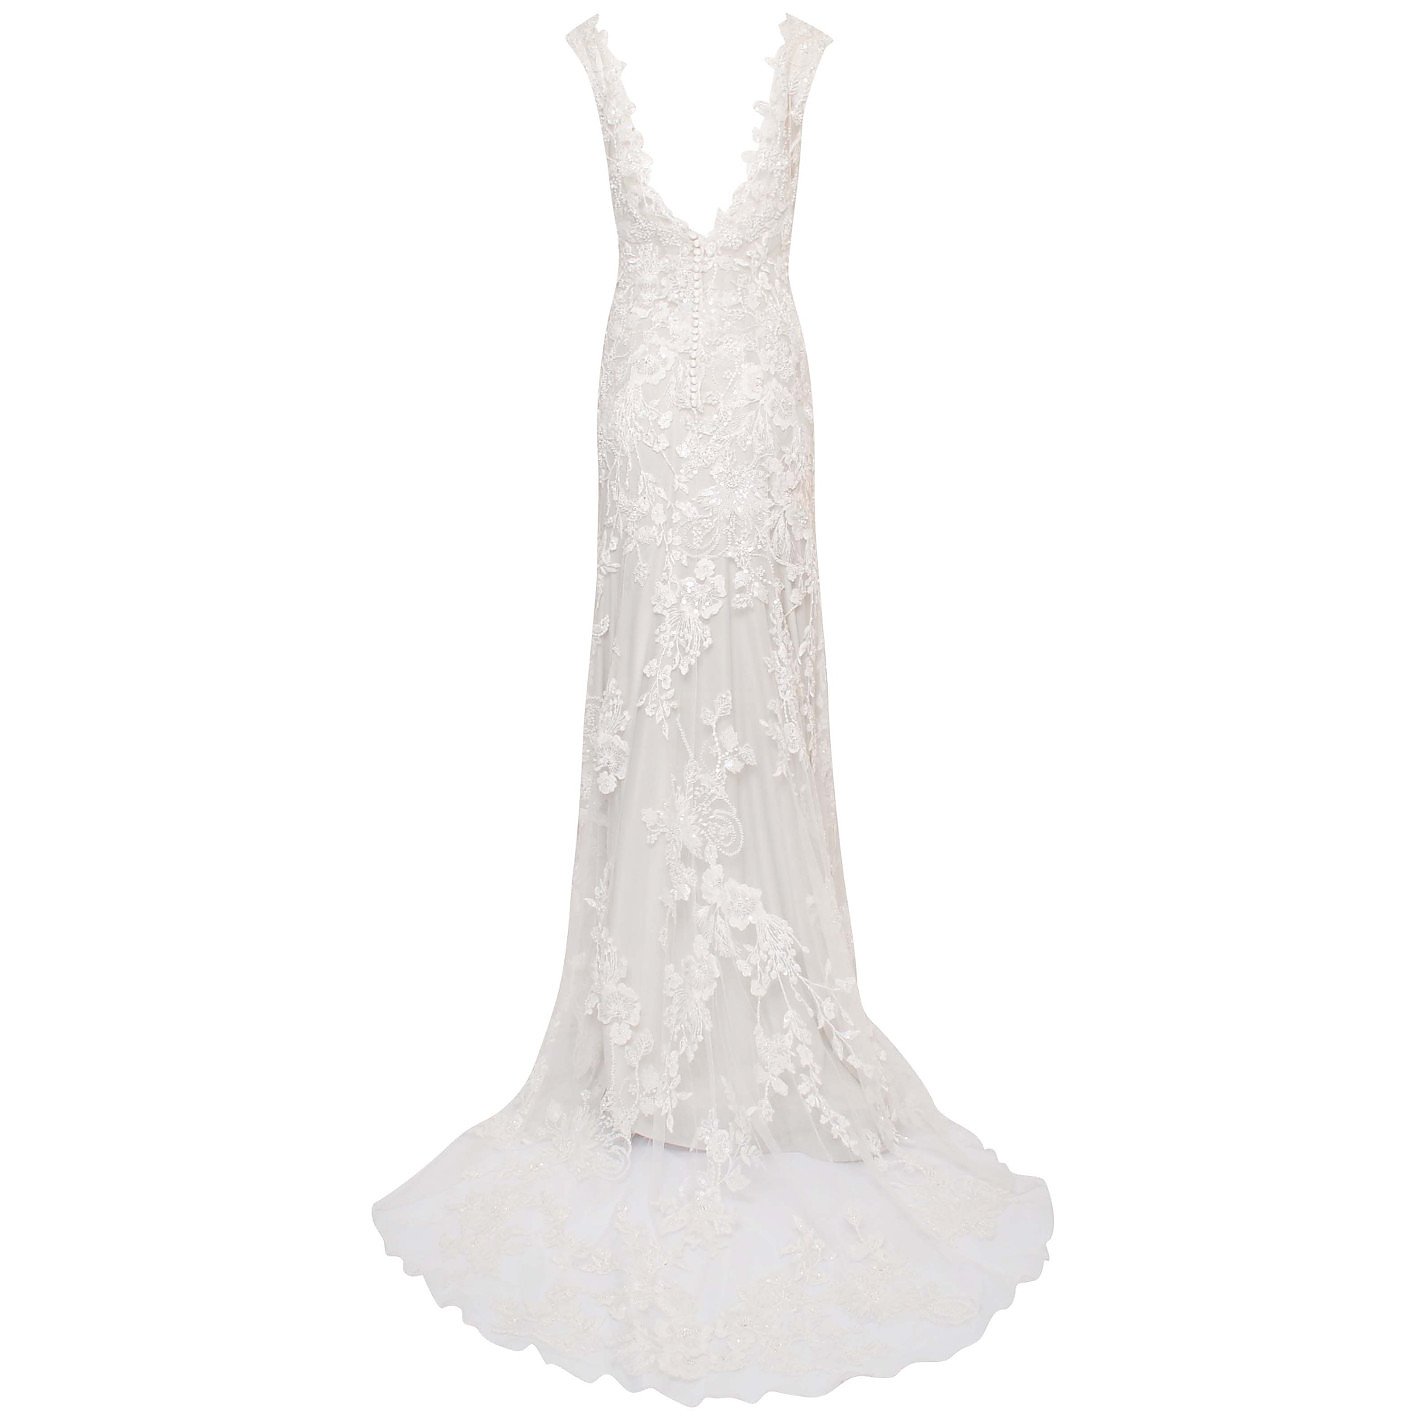 Allure Bridals Lace Wedding Gown